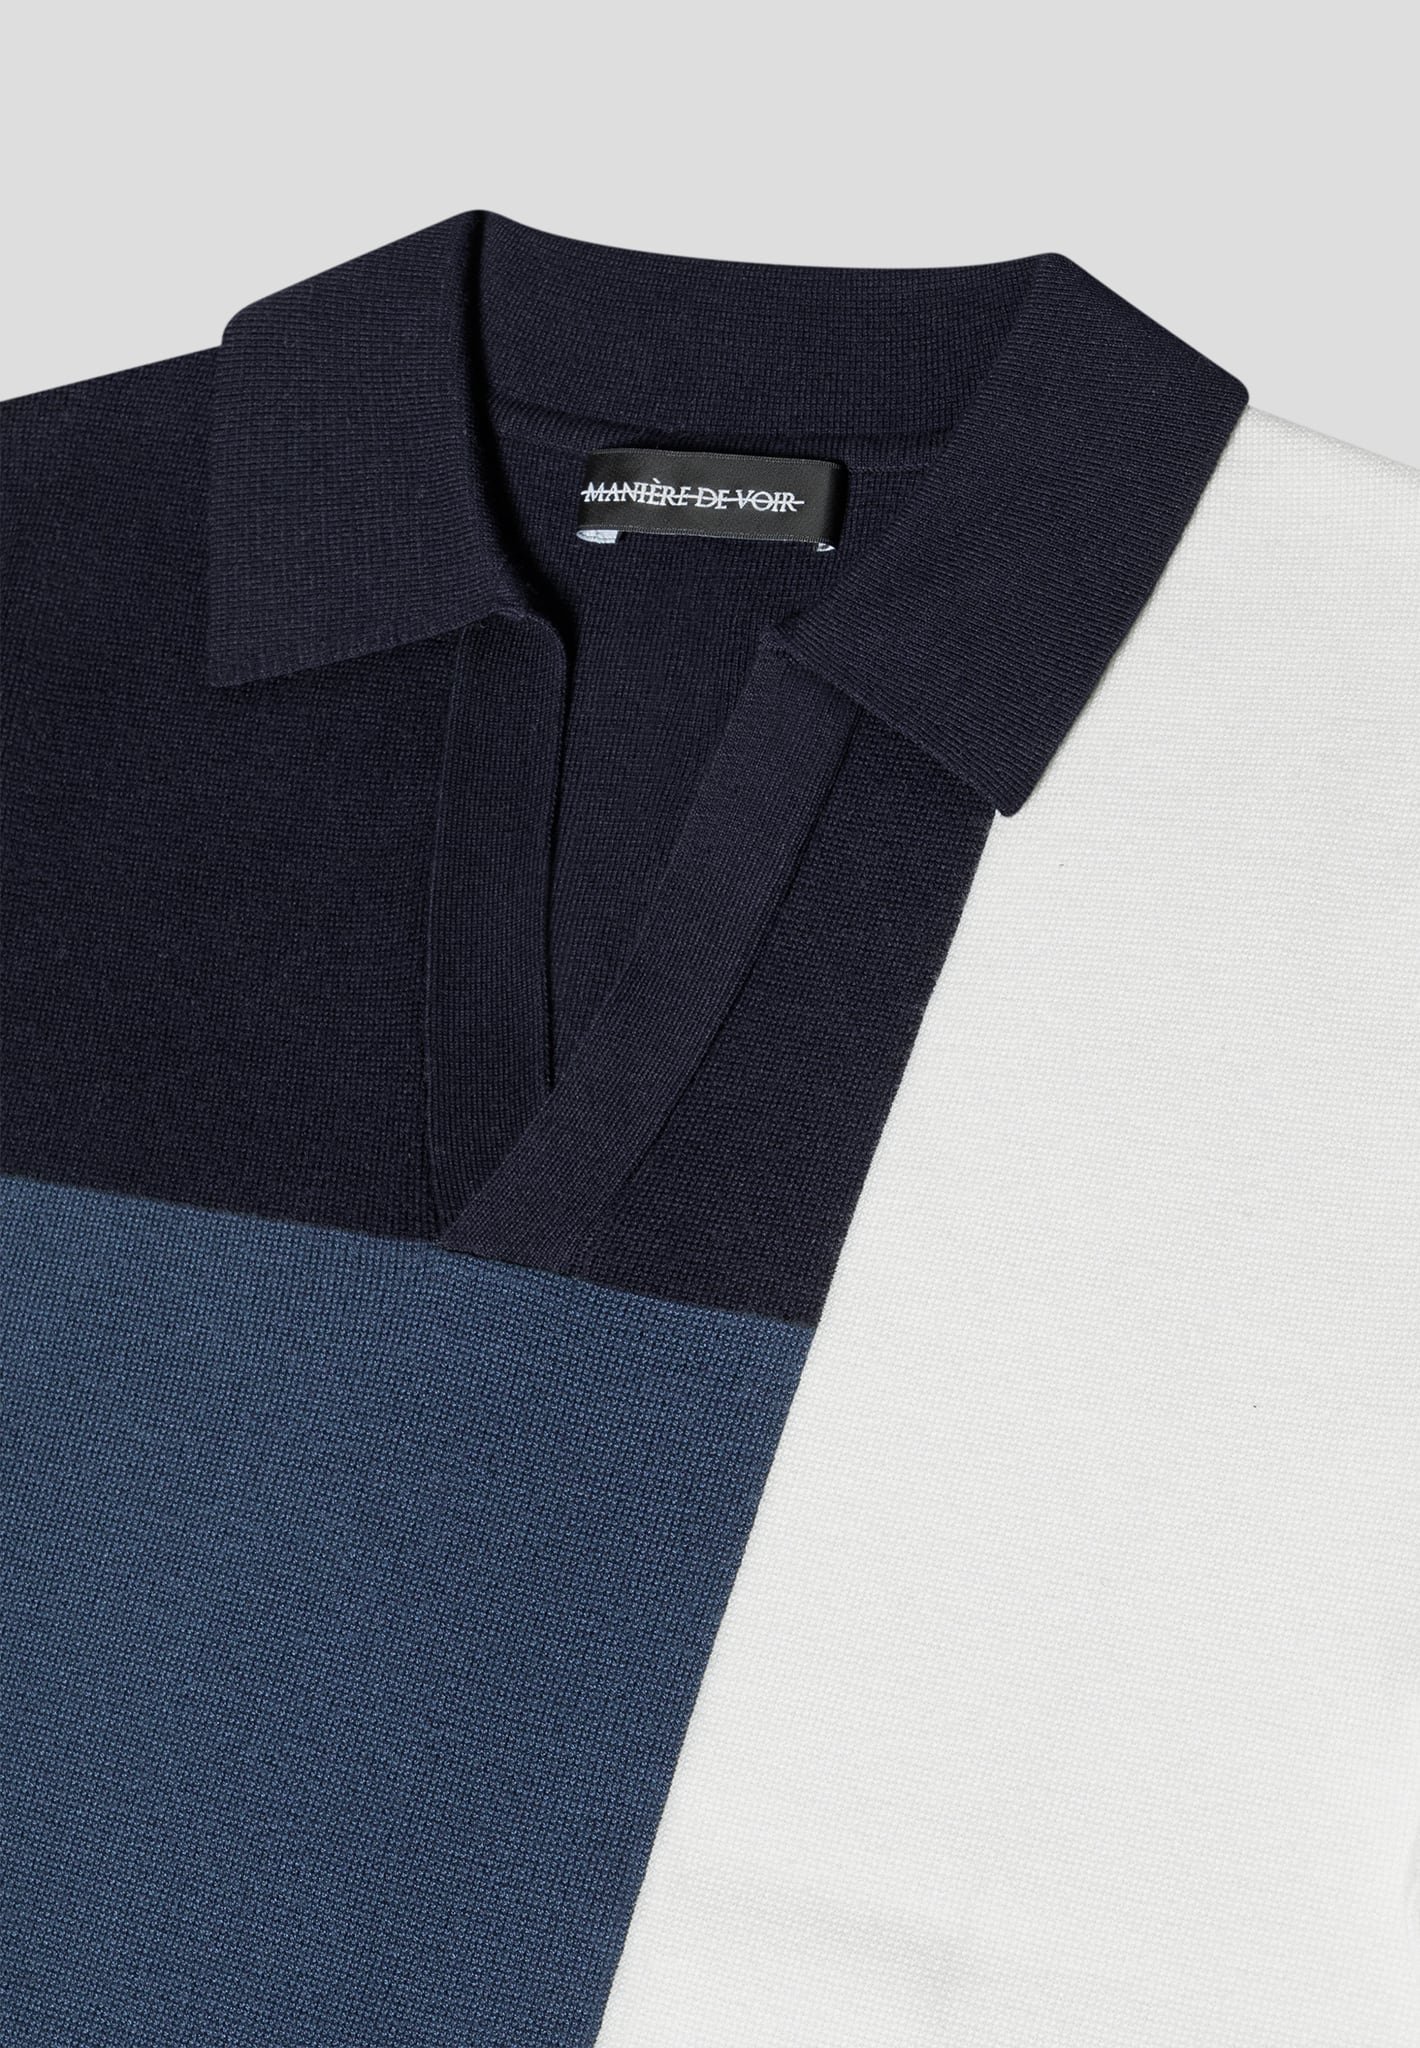 colour-block-knit-revere-polo-top-navy-steel-blue